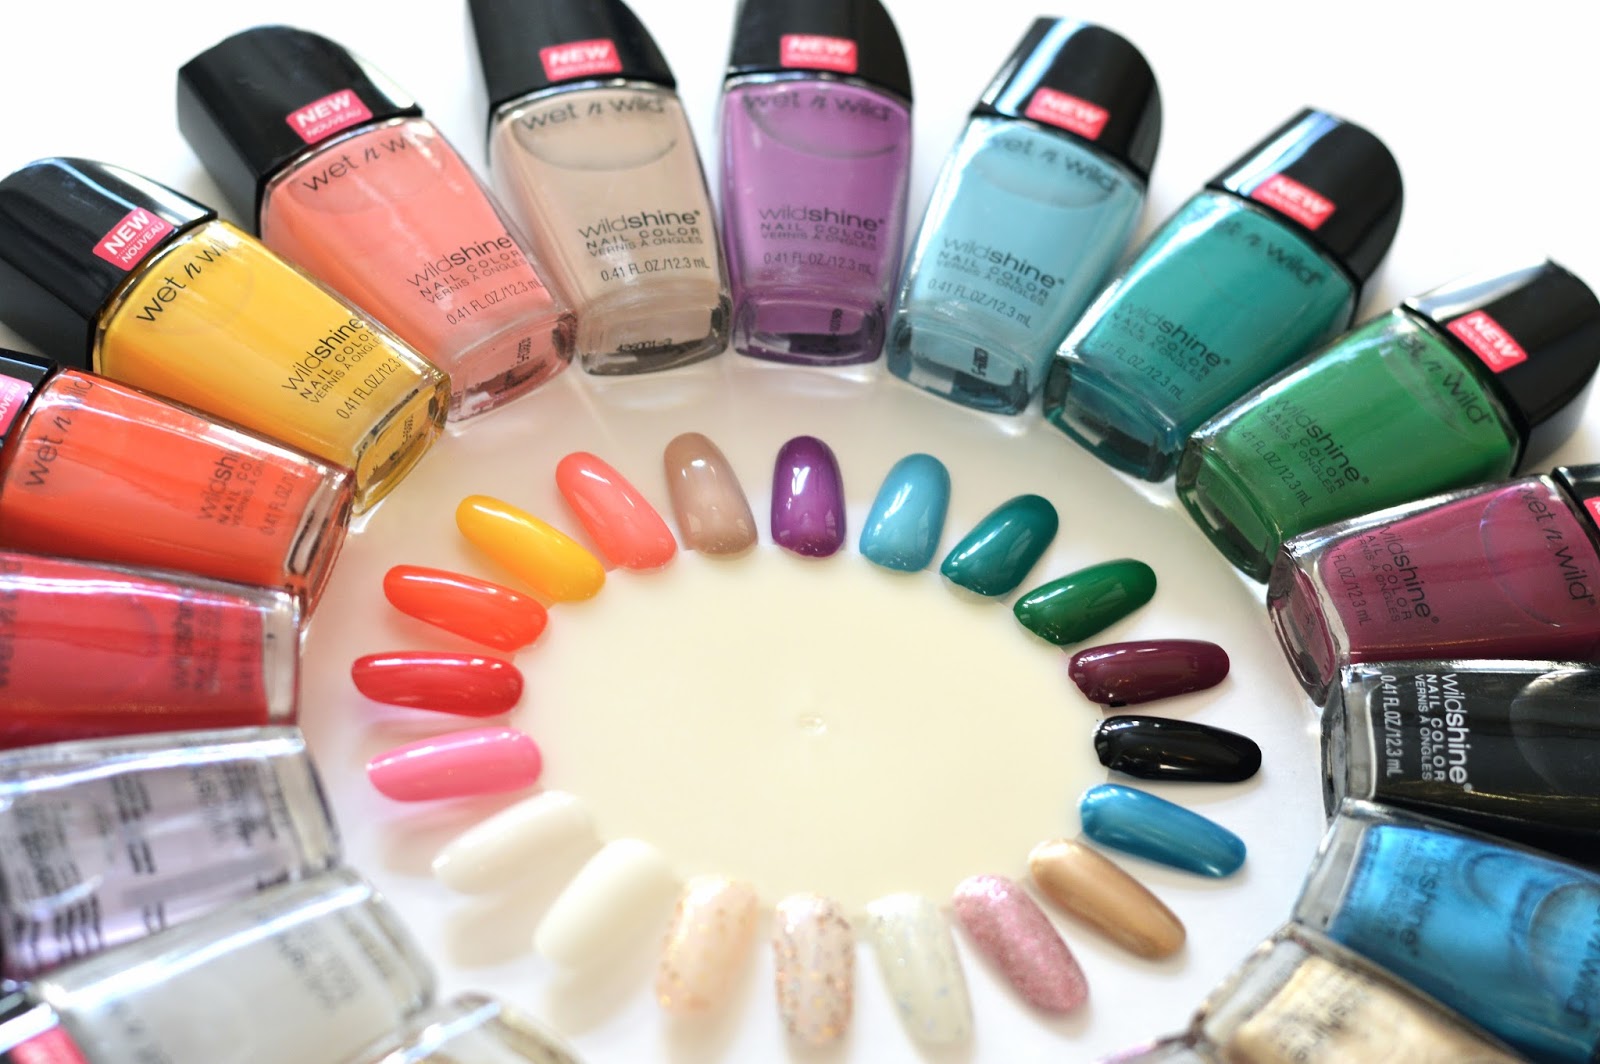 Wet n Wild - Wild Shine Nail Polish Swatches | Classically Contemporary